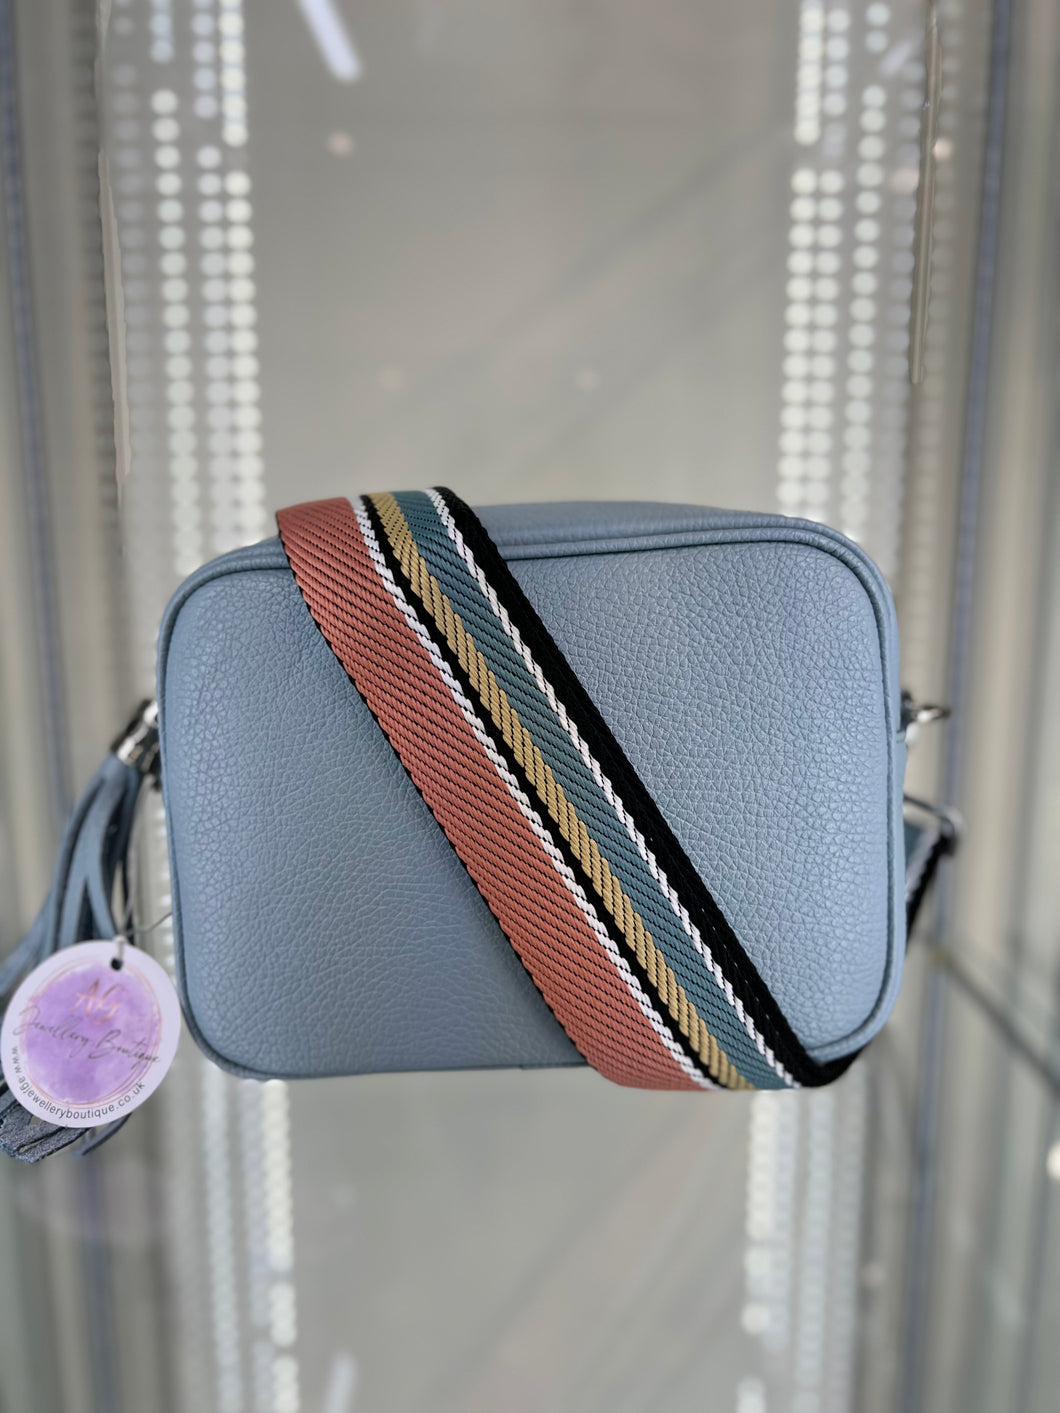 Real Leather Light Blue with Coral/Blue Striped Strap